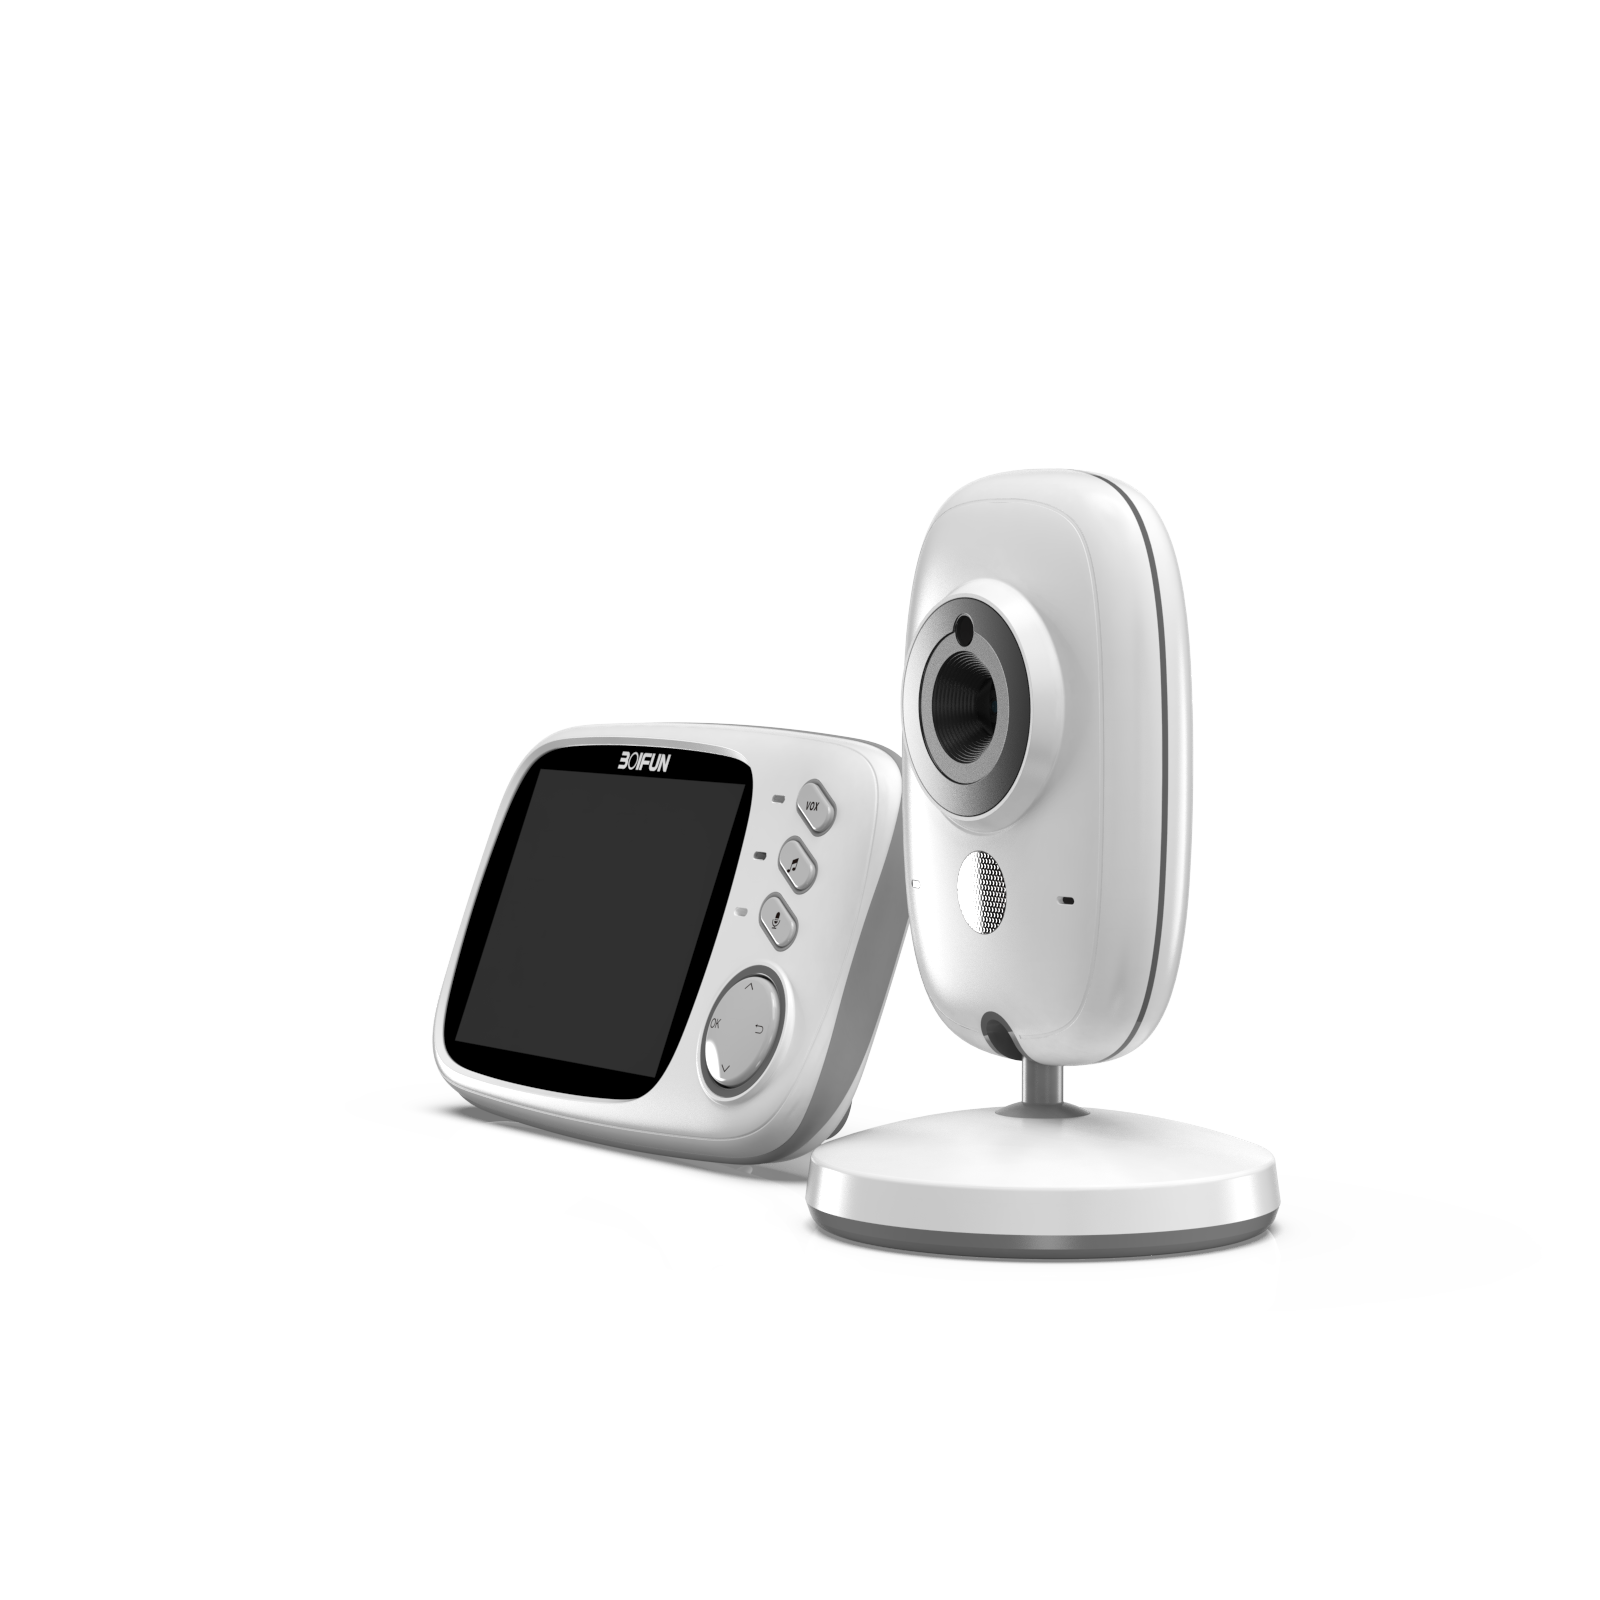 BOIFUN Baby Monitor with Camera and Audio, No WiFi, VOX Mode